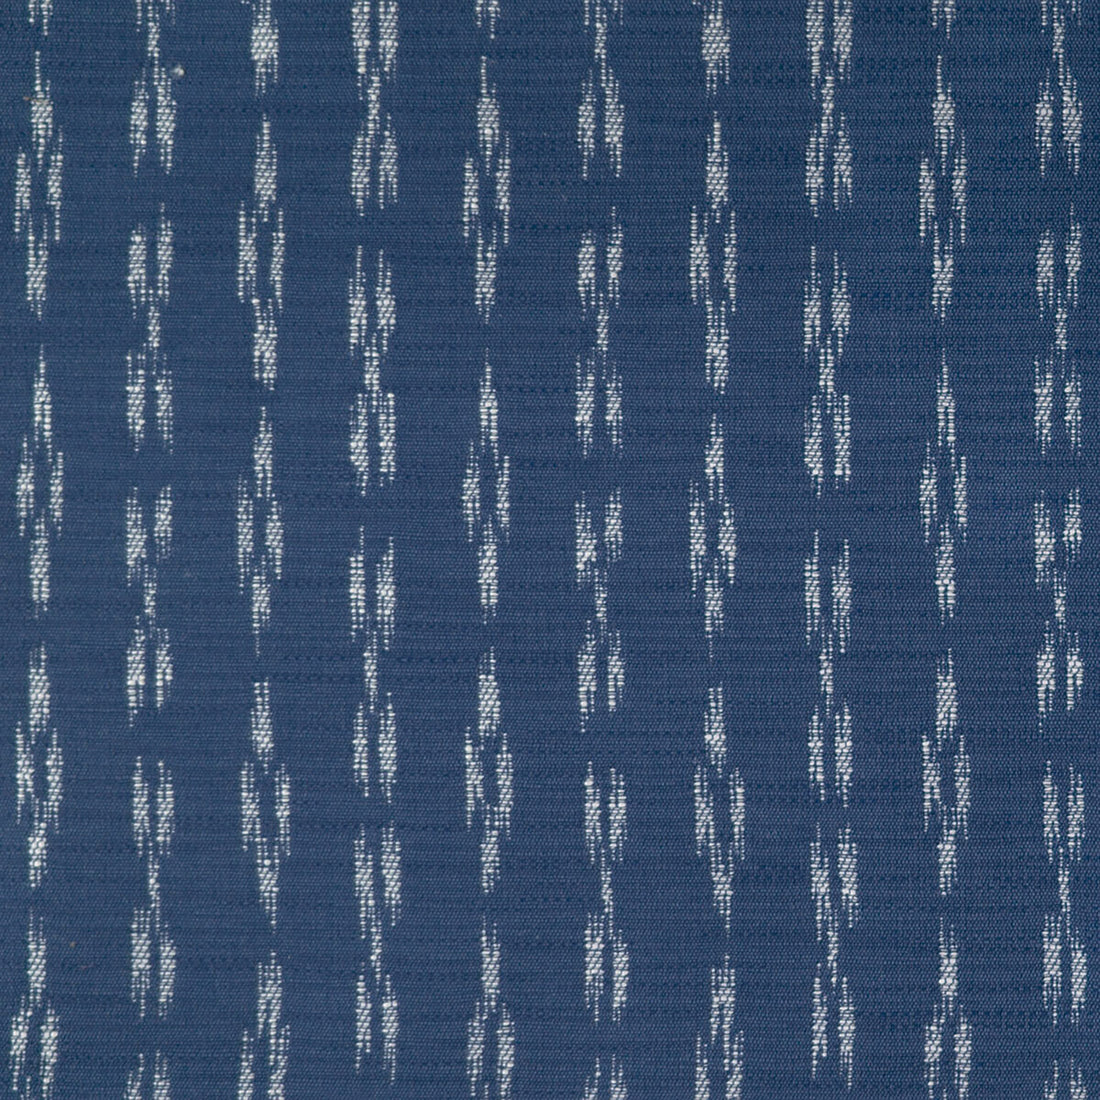 Yoko fabric in azul color - pattern GDT5647.004.0 - by Gaston y Daniela in the Gaston Japon collection